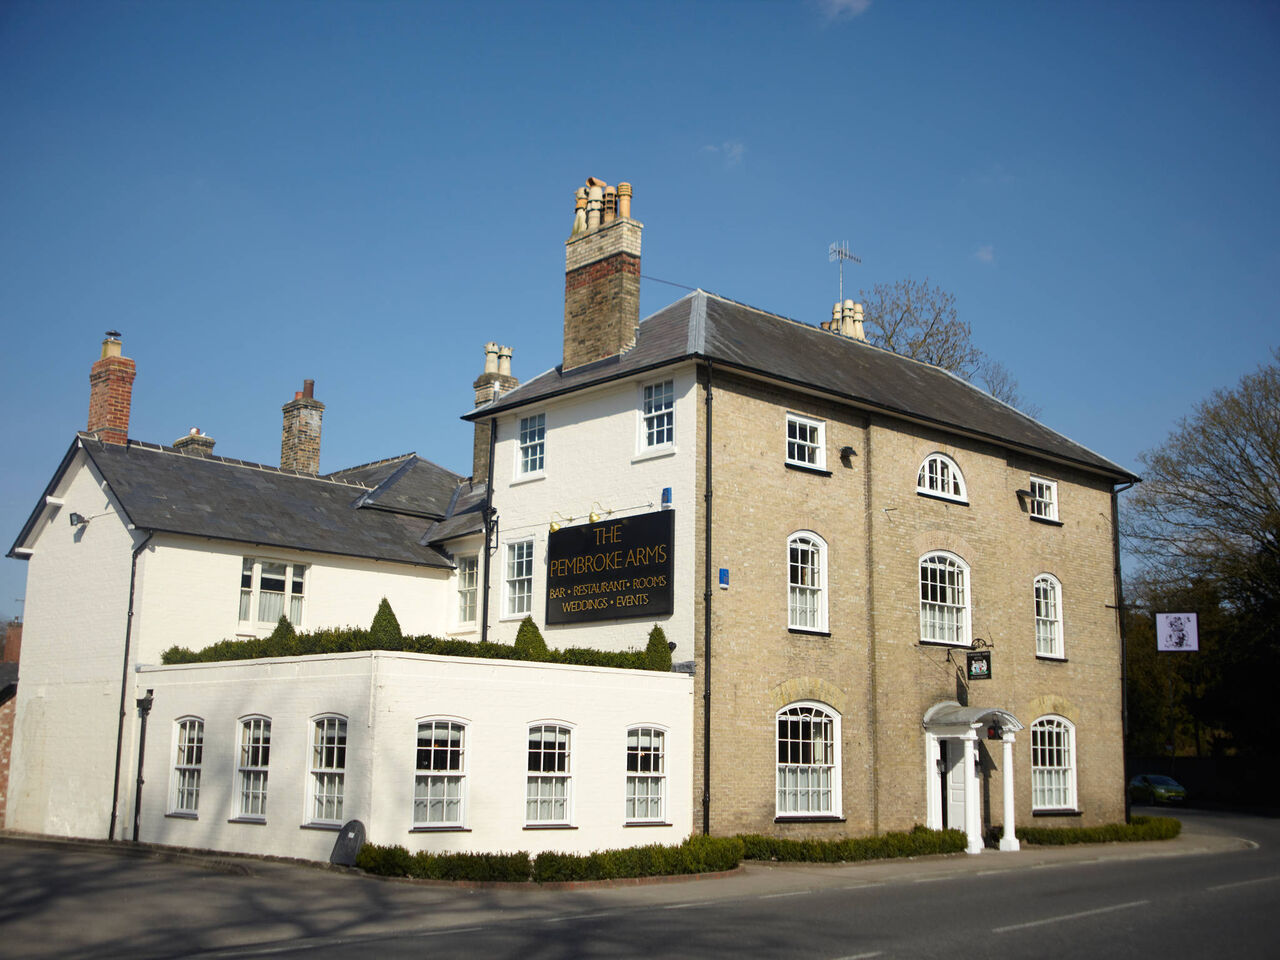 A photo of The Pembroke Arms